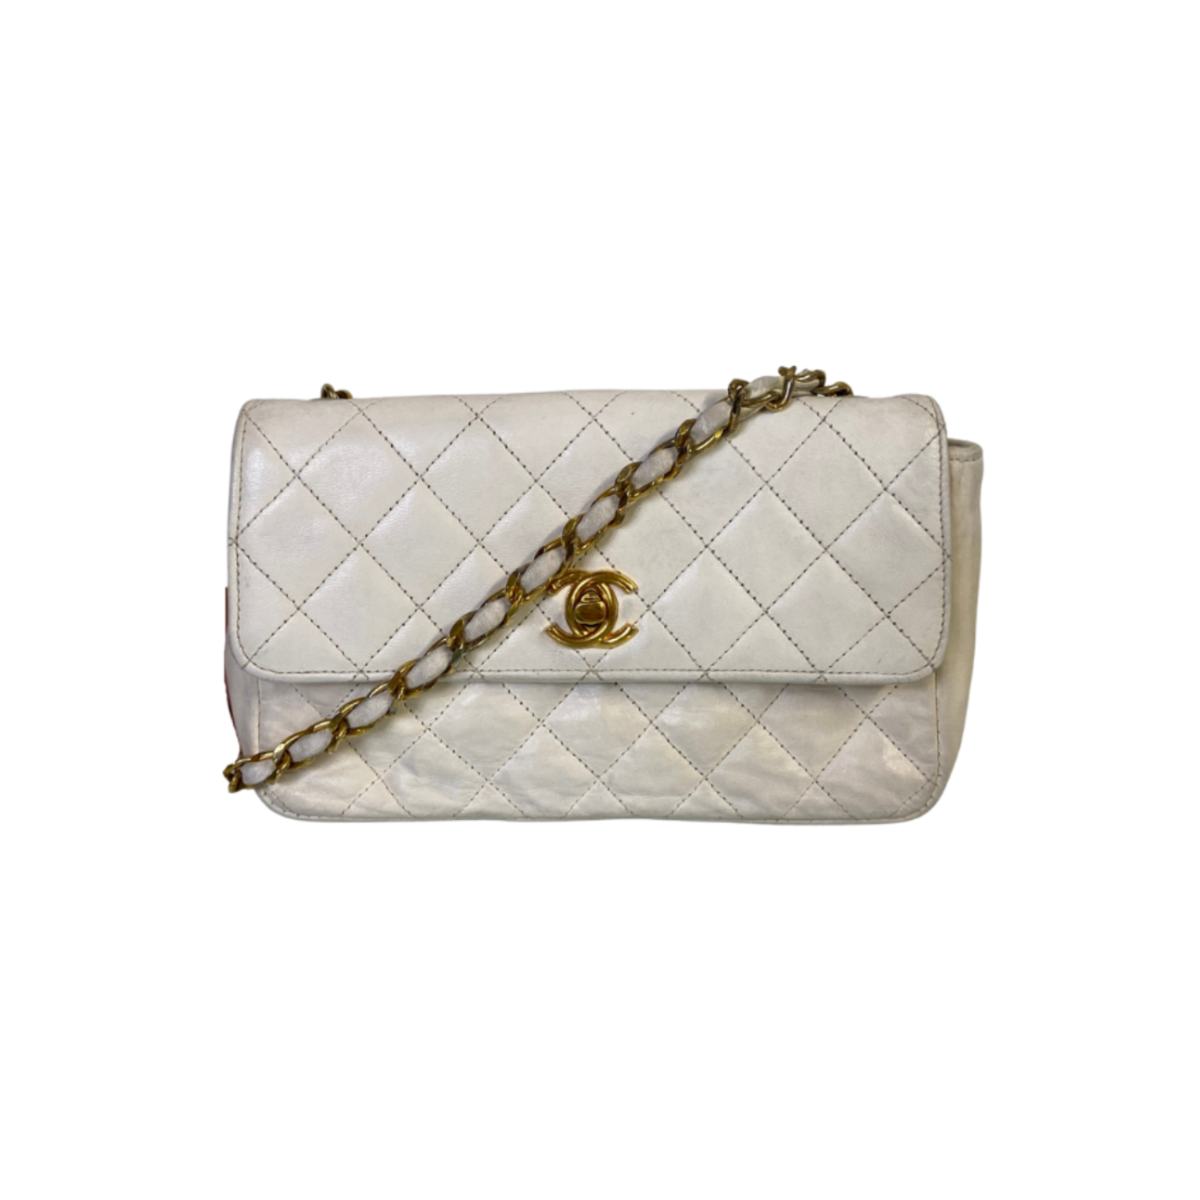 Chanel TIMELESS/CLASSIQUE LEATHER CROSSBODY BAG